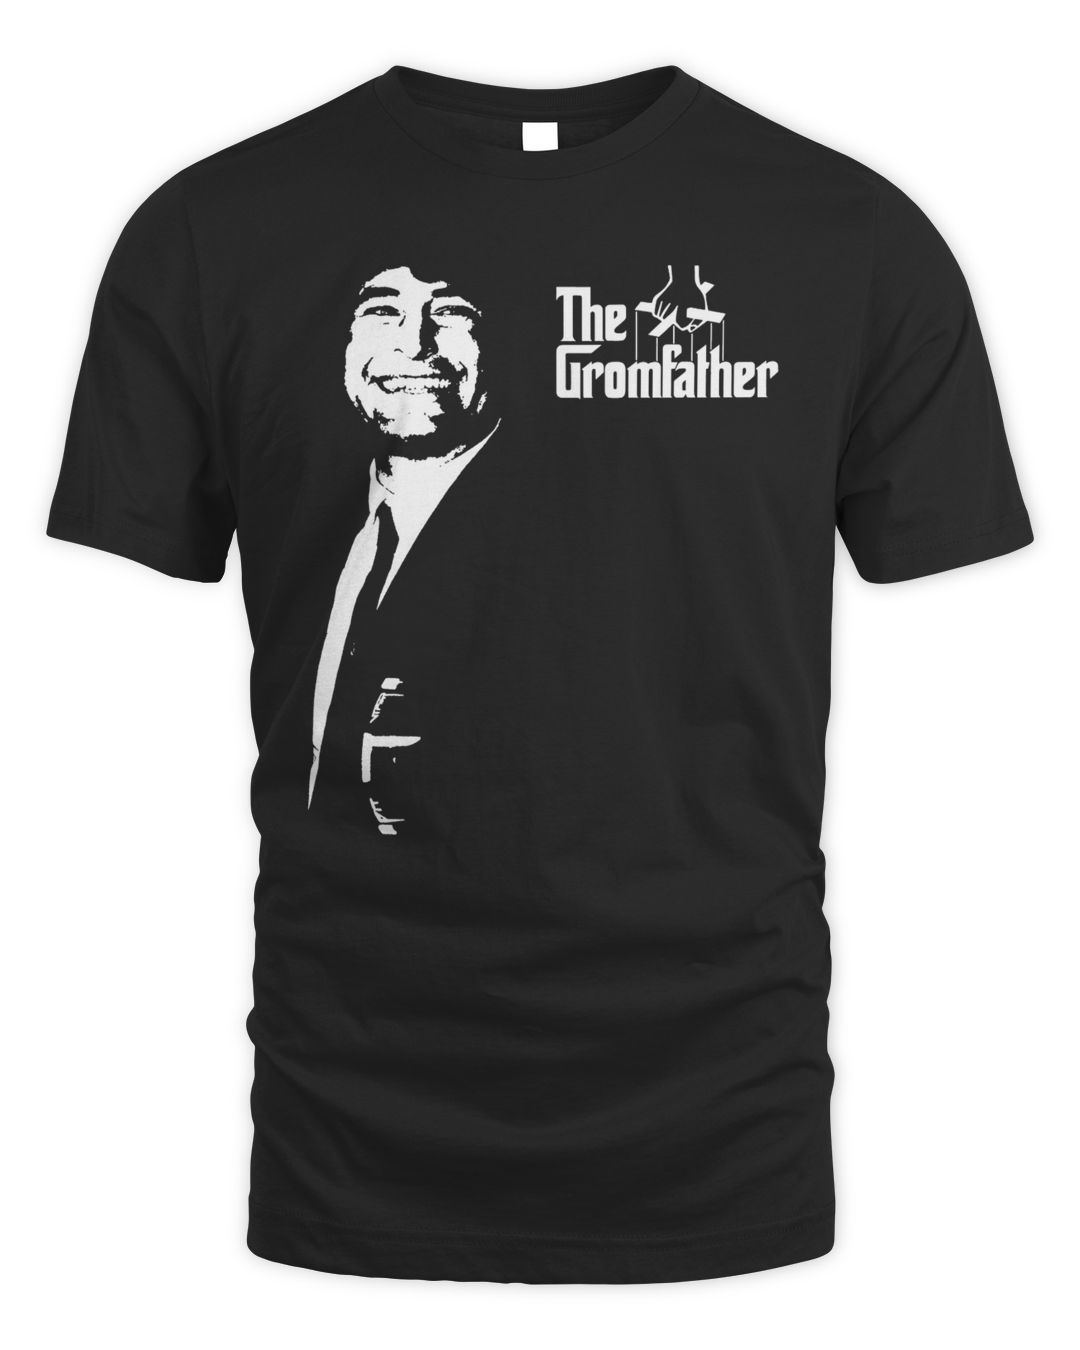 Poopies Merch The Gromfather Shirt